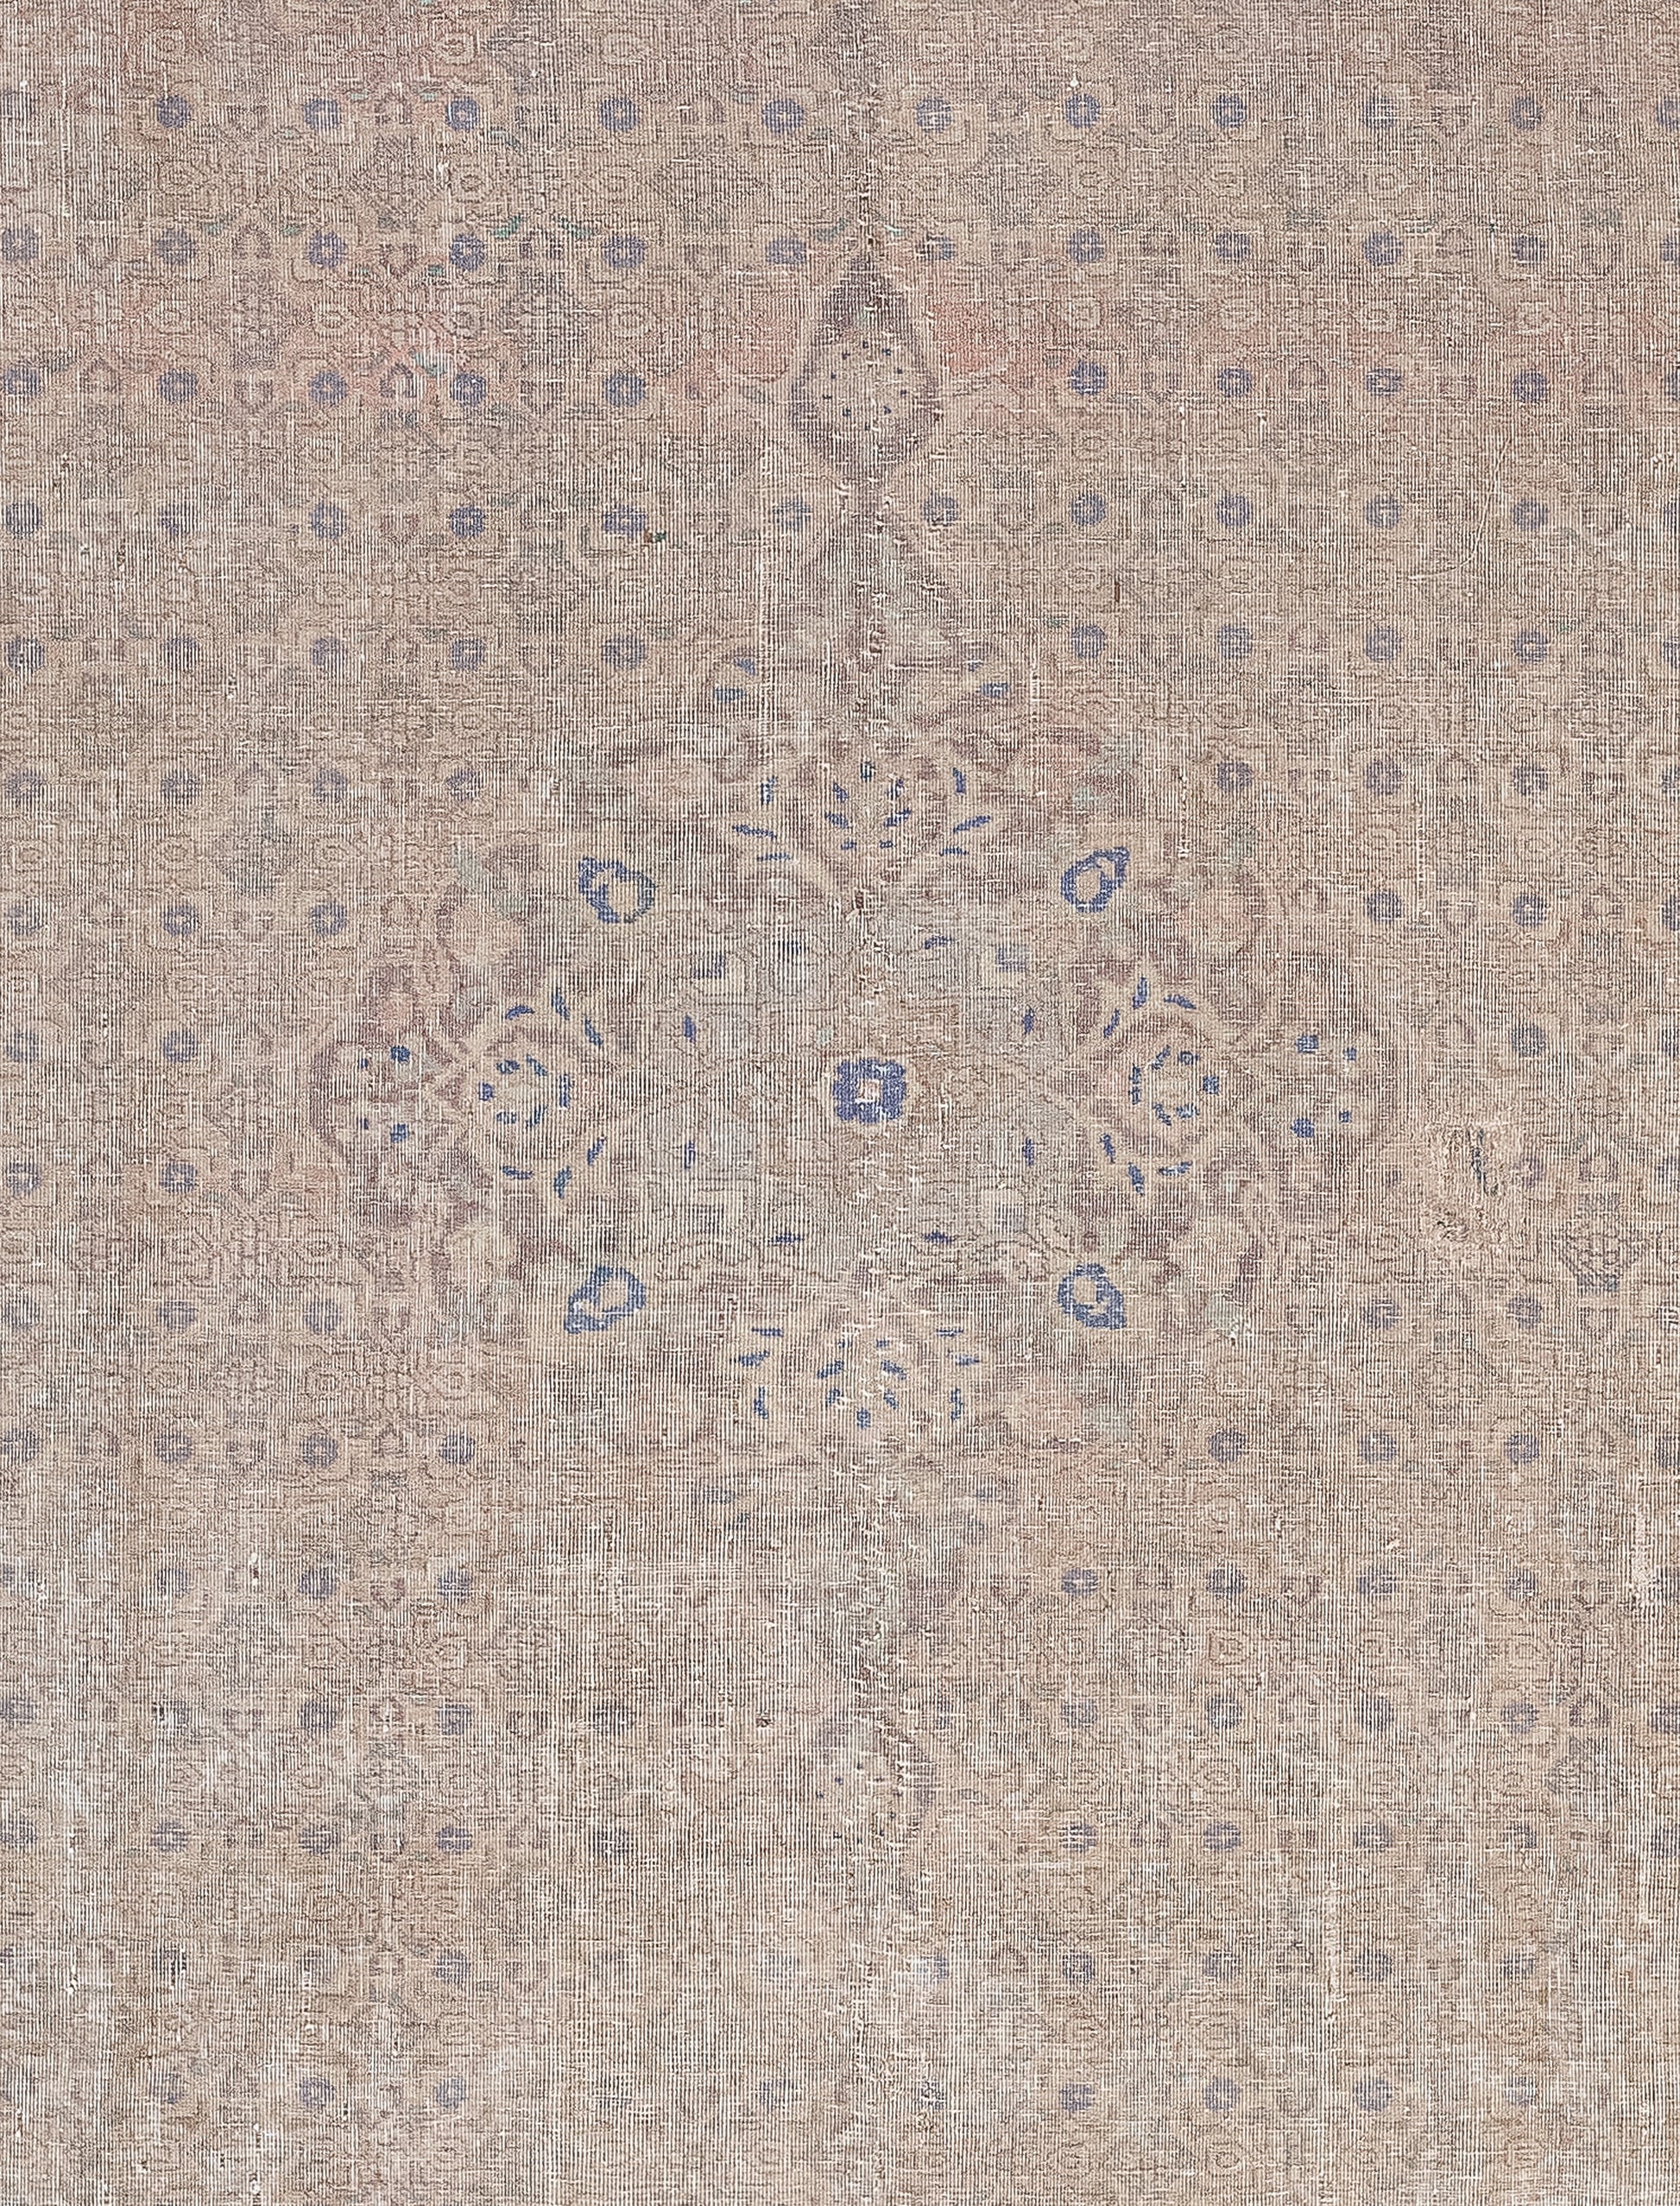 The center of the rug features a fascinating diamond formed by symmetrical organic lines.